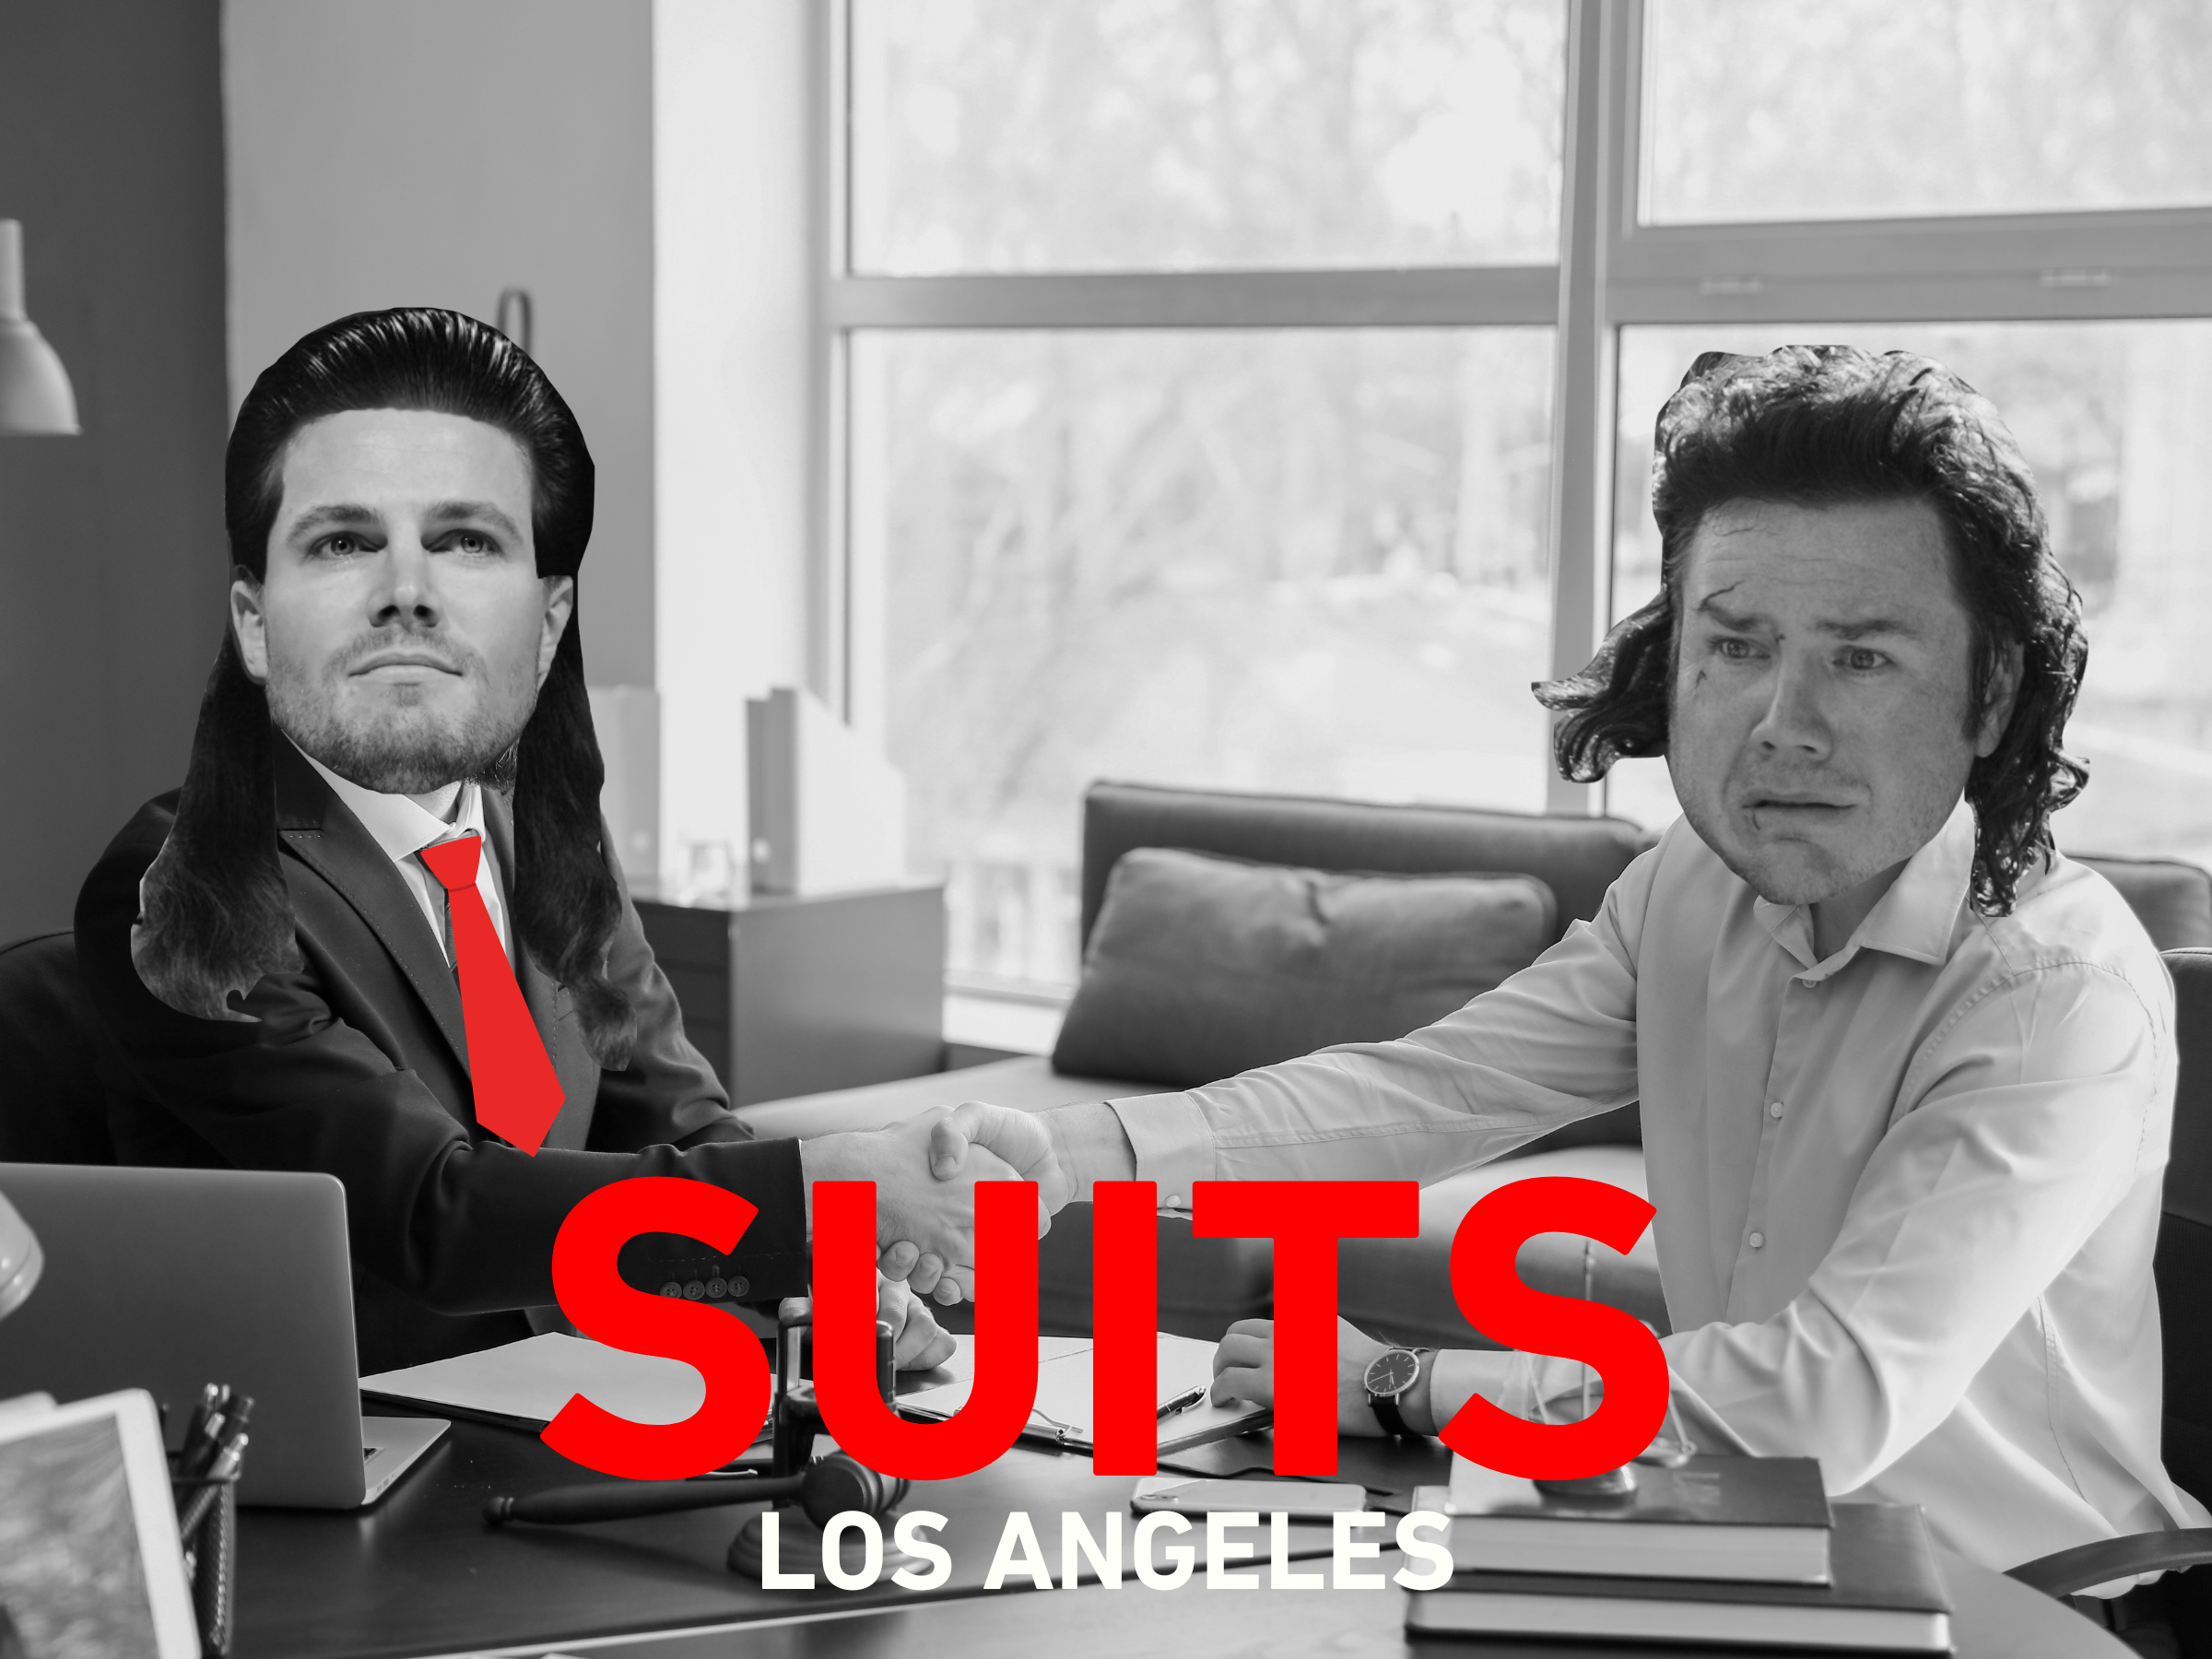 Stephen Amell and Josh McDermitt in a mockup of Suits LA